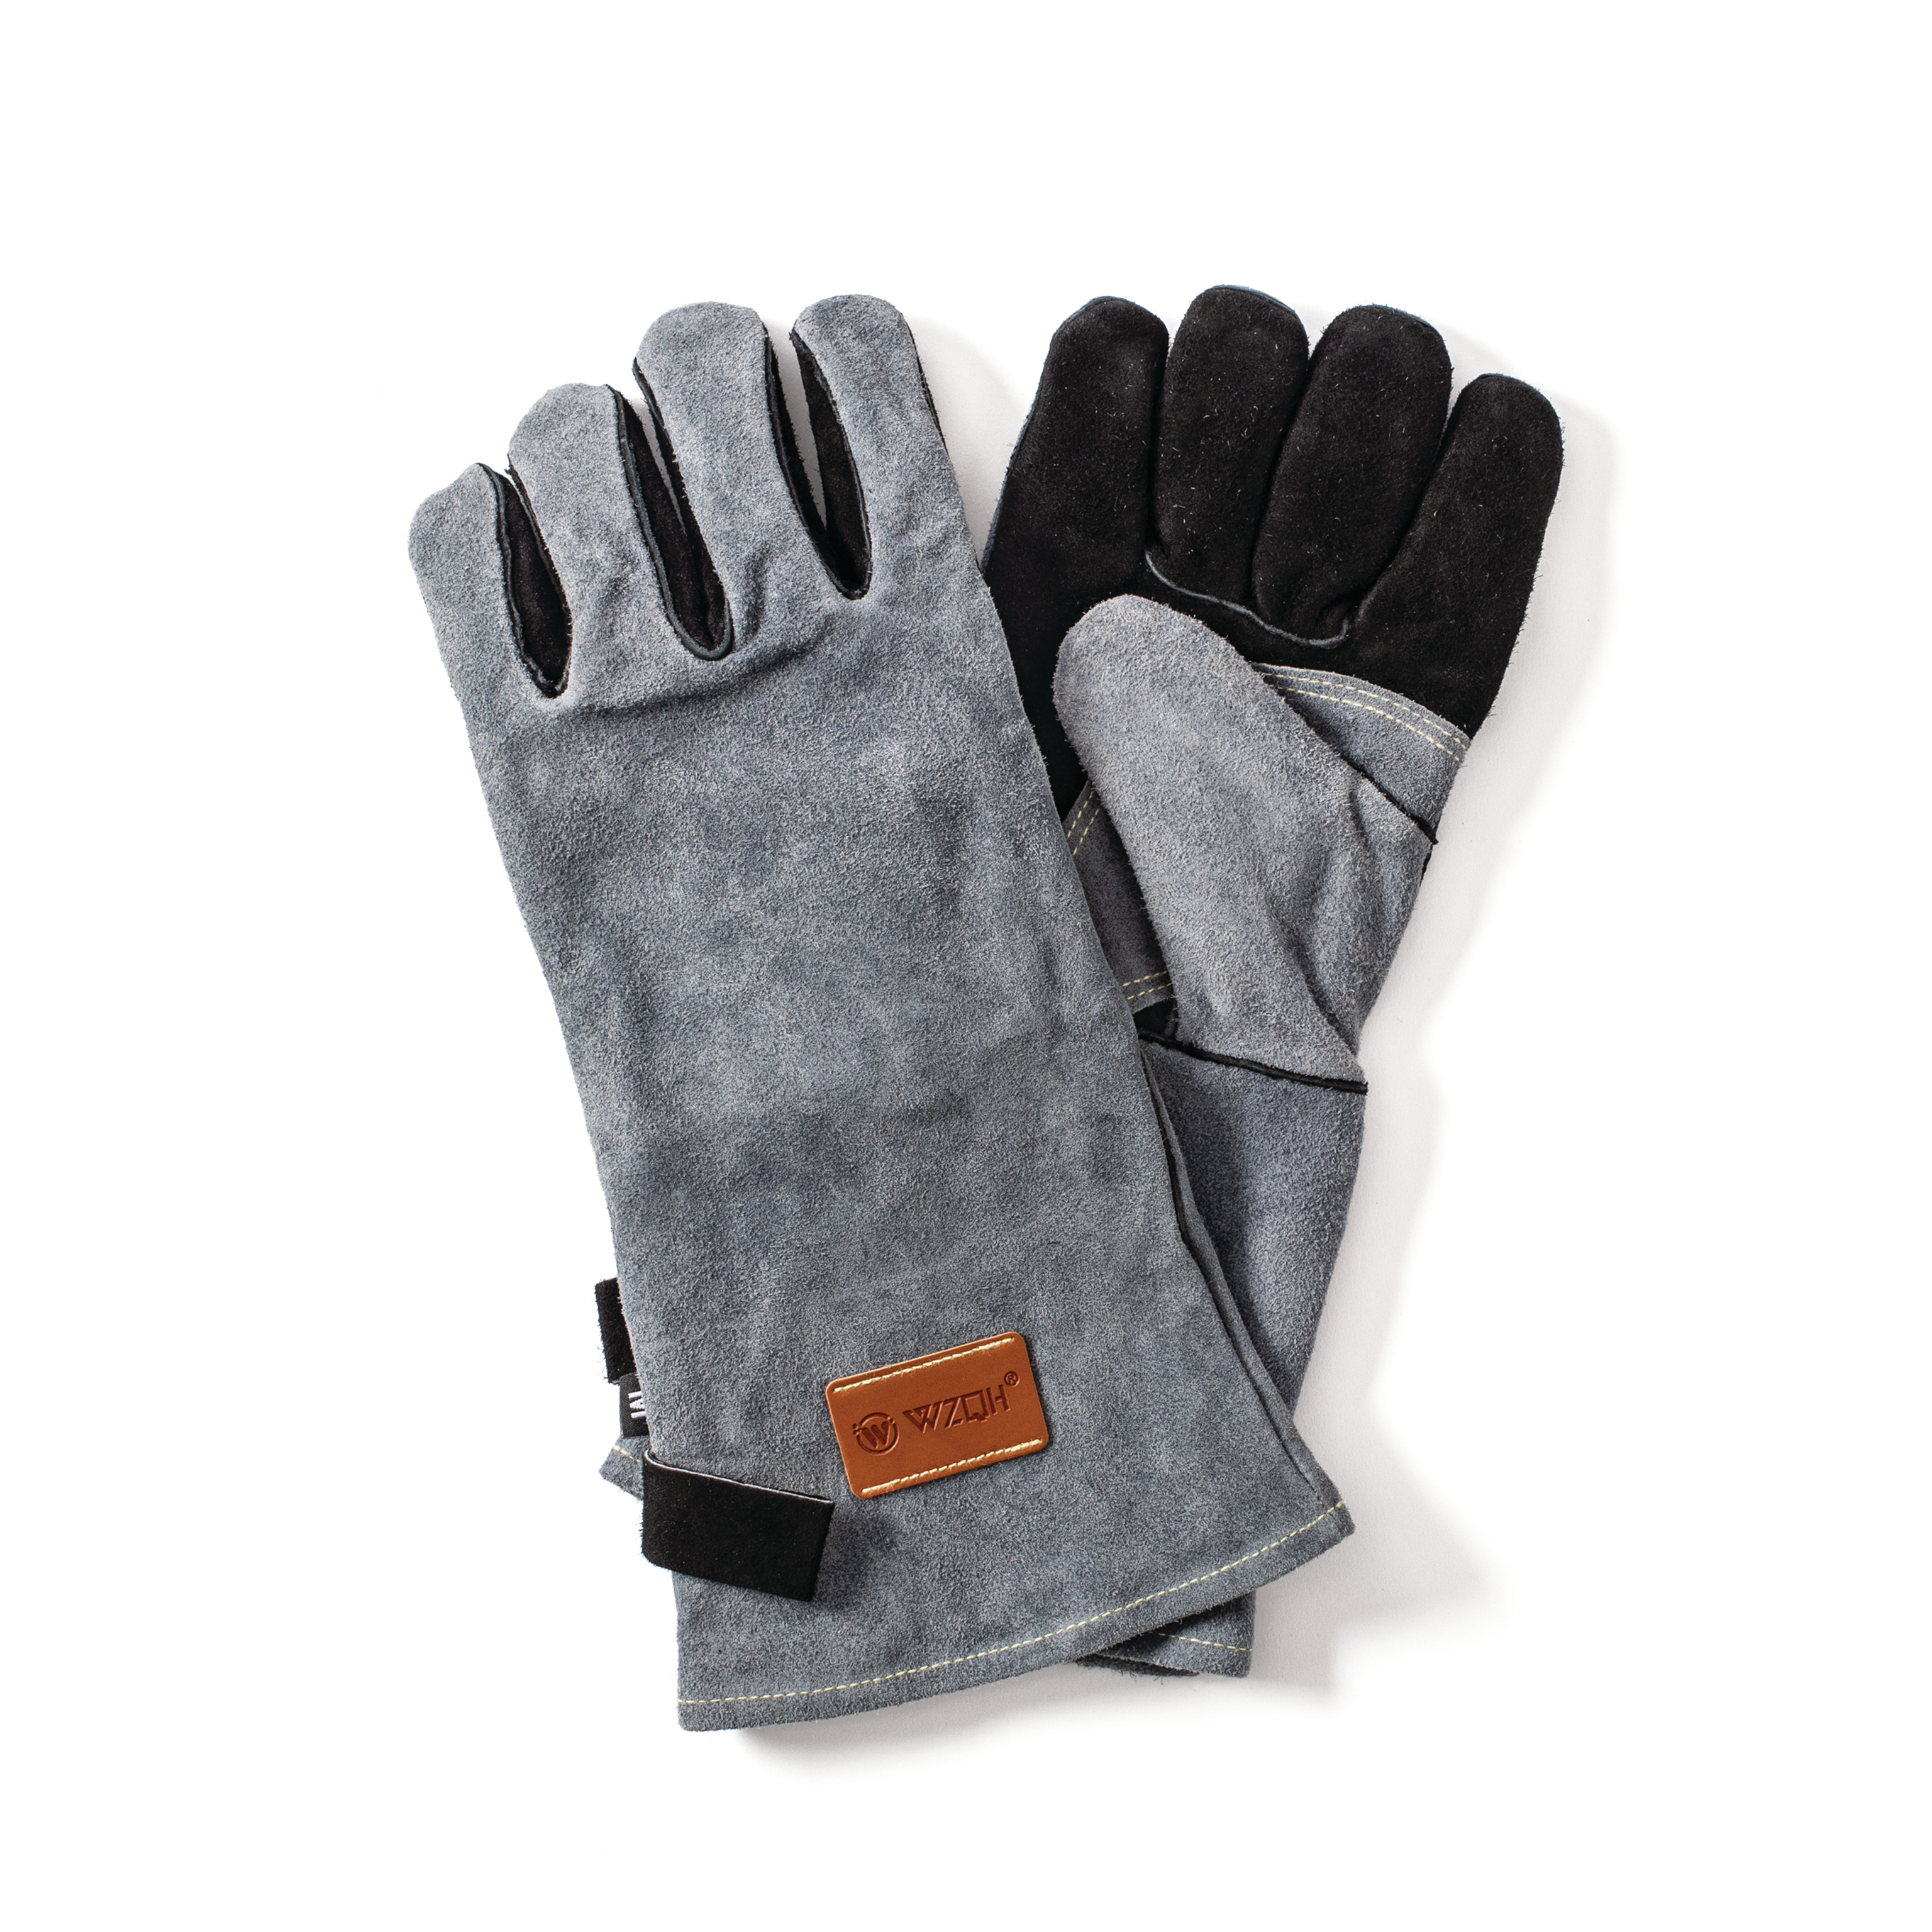 https://res.cloudinary.com/hksqkdlah/image/upload/ATK%20Reviews/2023/Grill%20Gloves/SIL_Grill-Gloves_WZQH-Leather-Forge_Welding-Gloves_9443.png